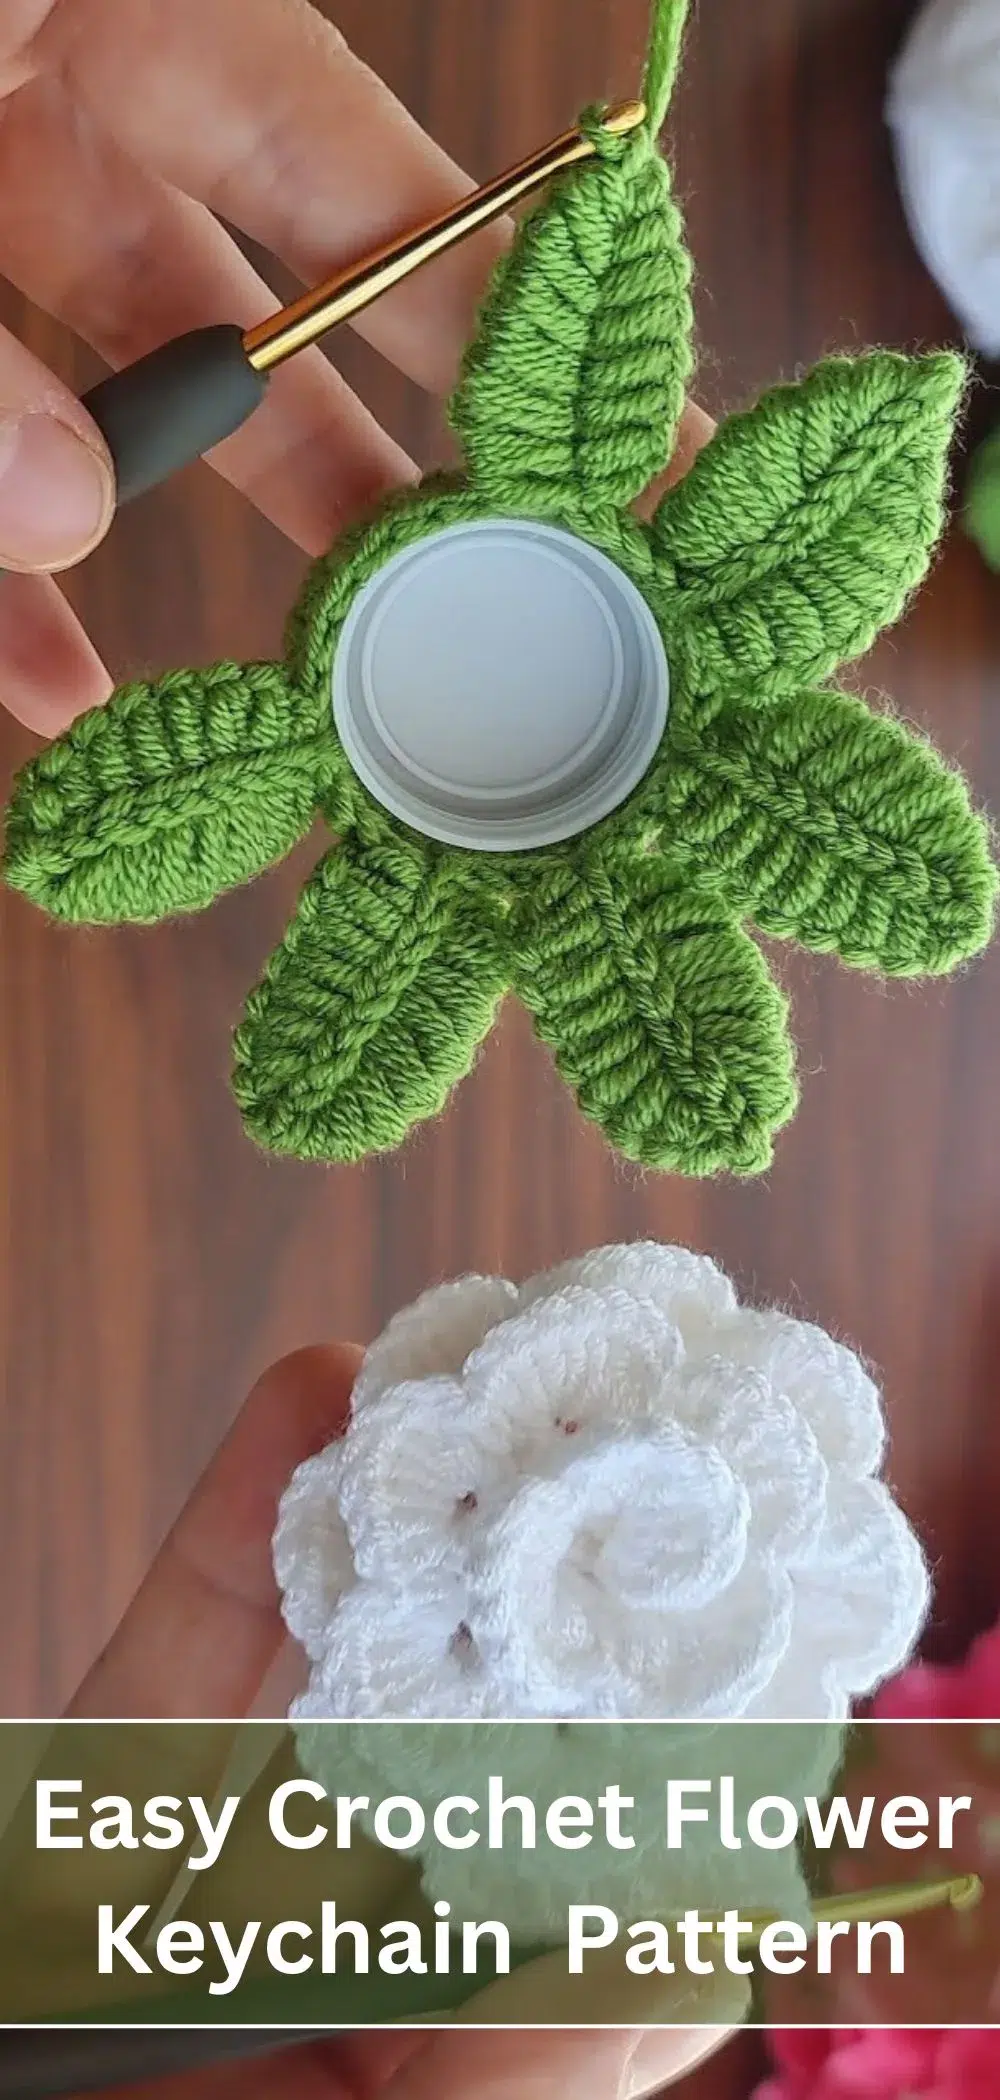 Such A Wonderful Easy Crochet Flower Keychain Pattern can be done by beginners. You will use simple crochet techniques in this project.